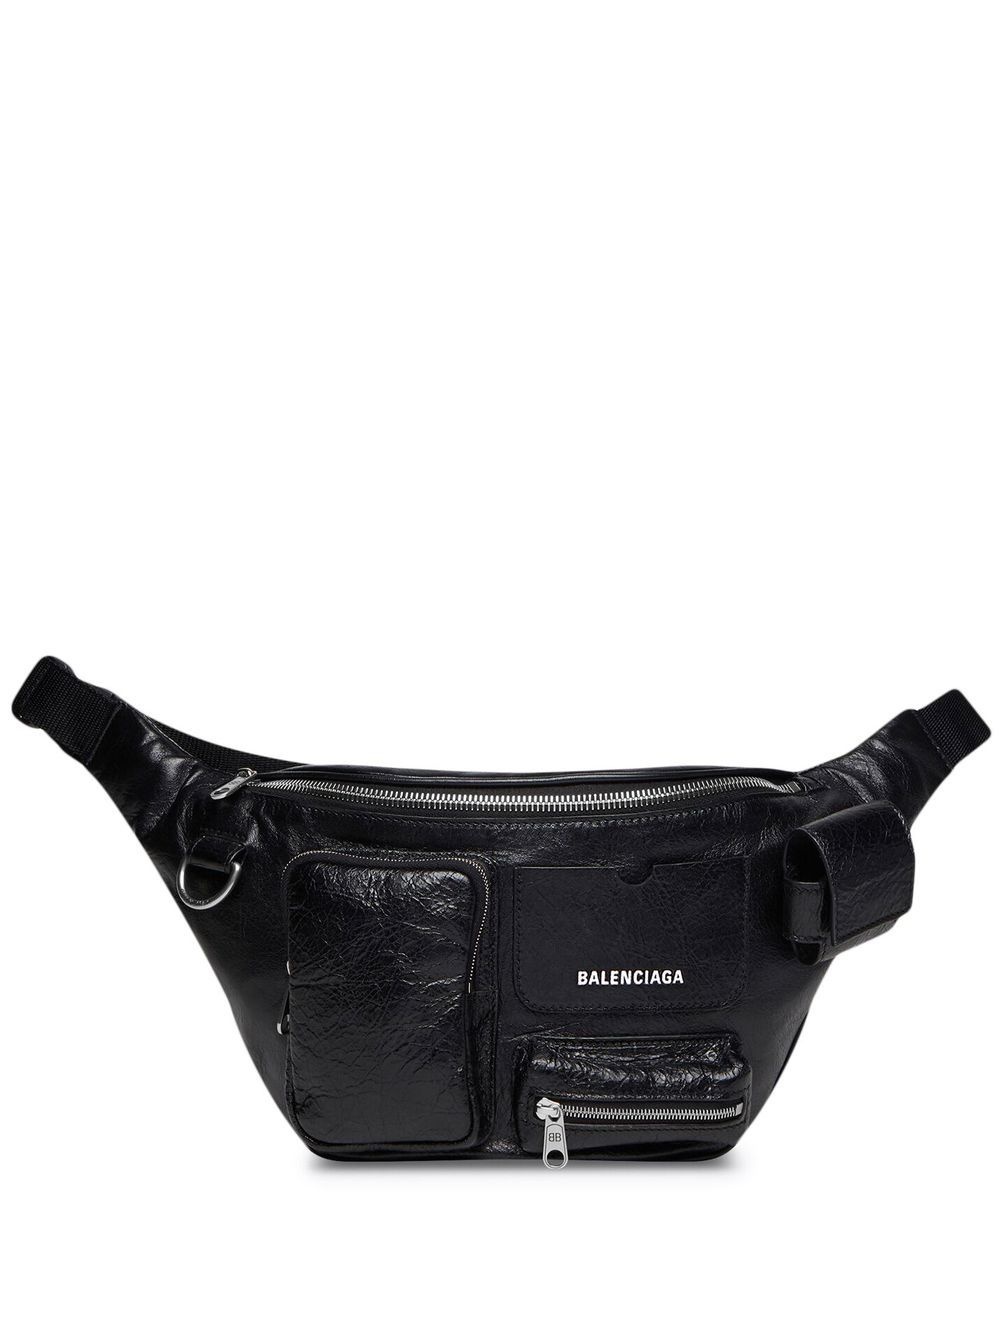 Super Busy branded fanny pack - 1